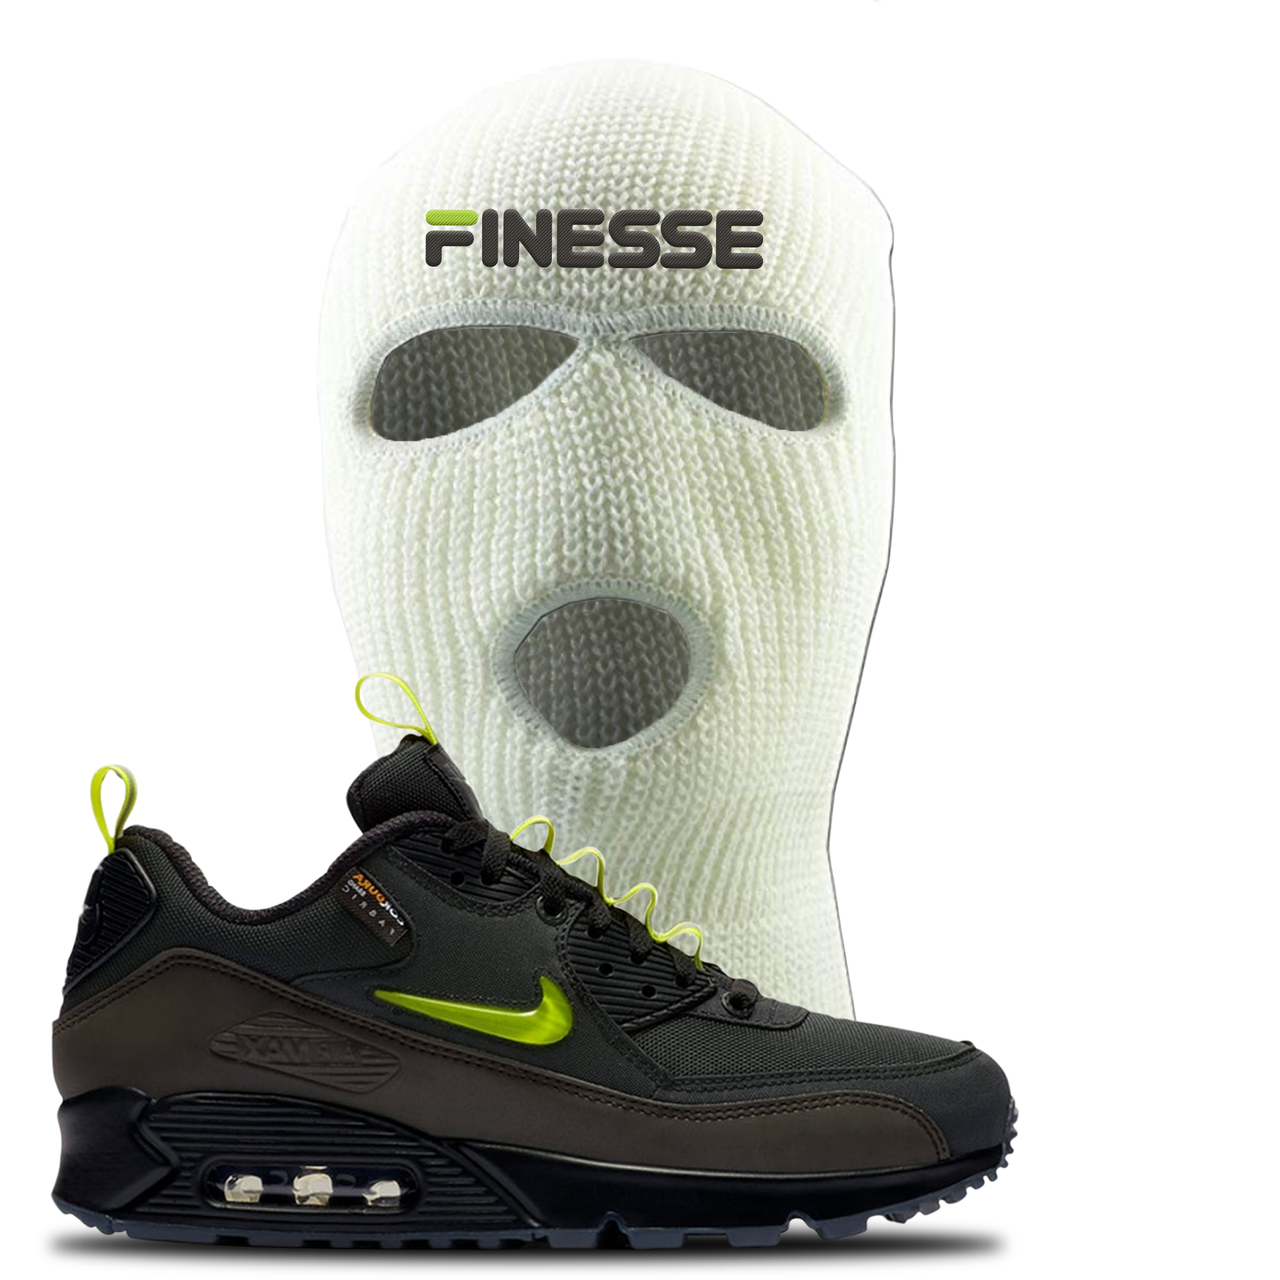 The Basement X Air Max 90 Manchester Finesse White Sneaker Hook Up Ski Mask